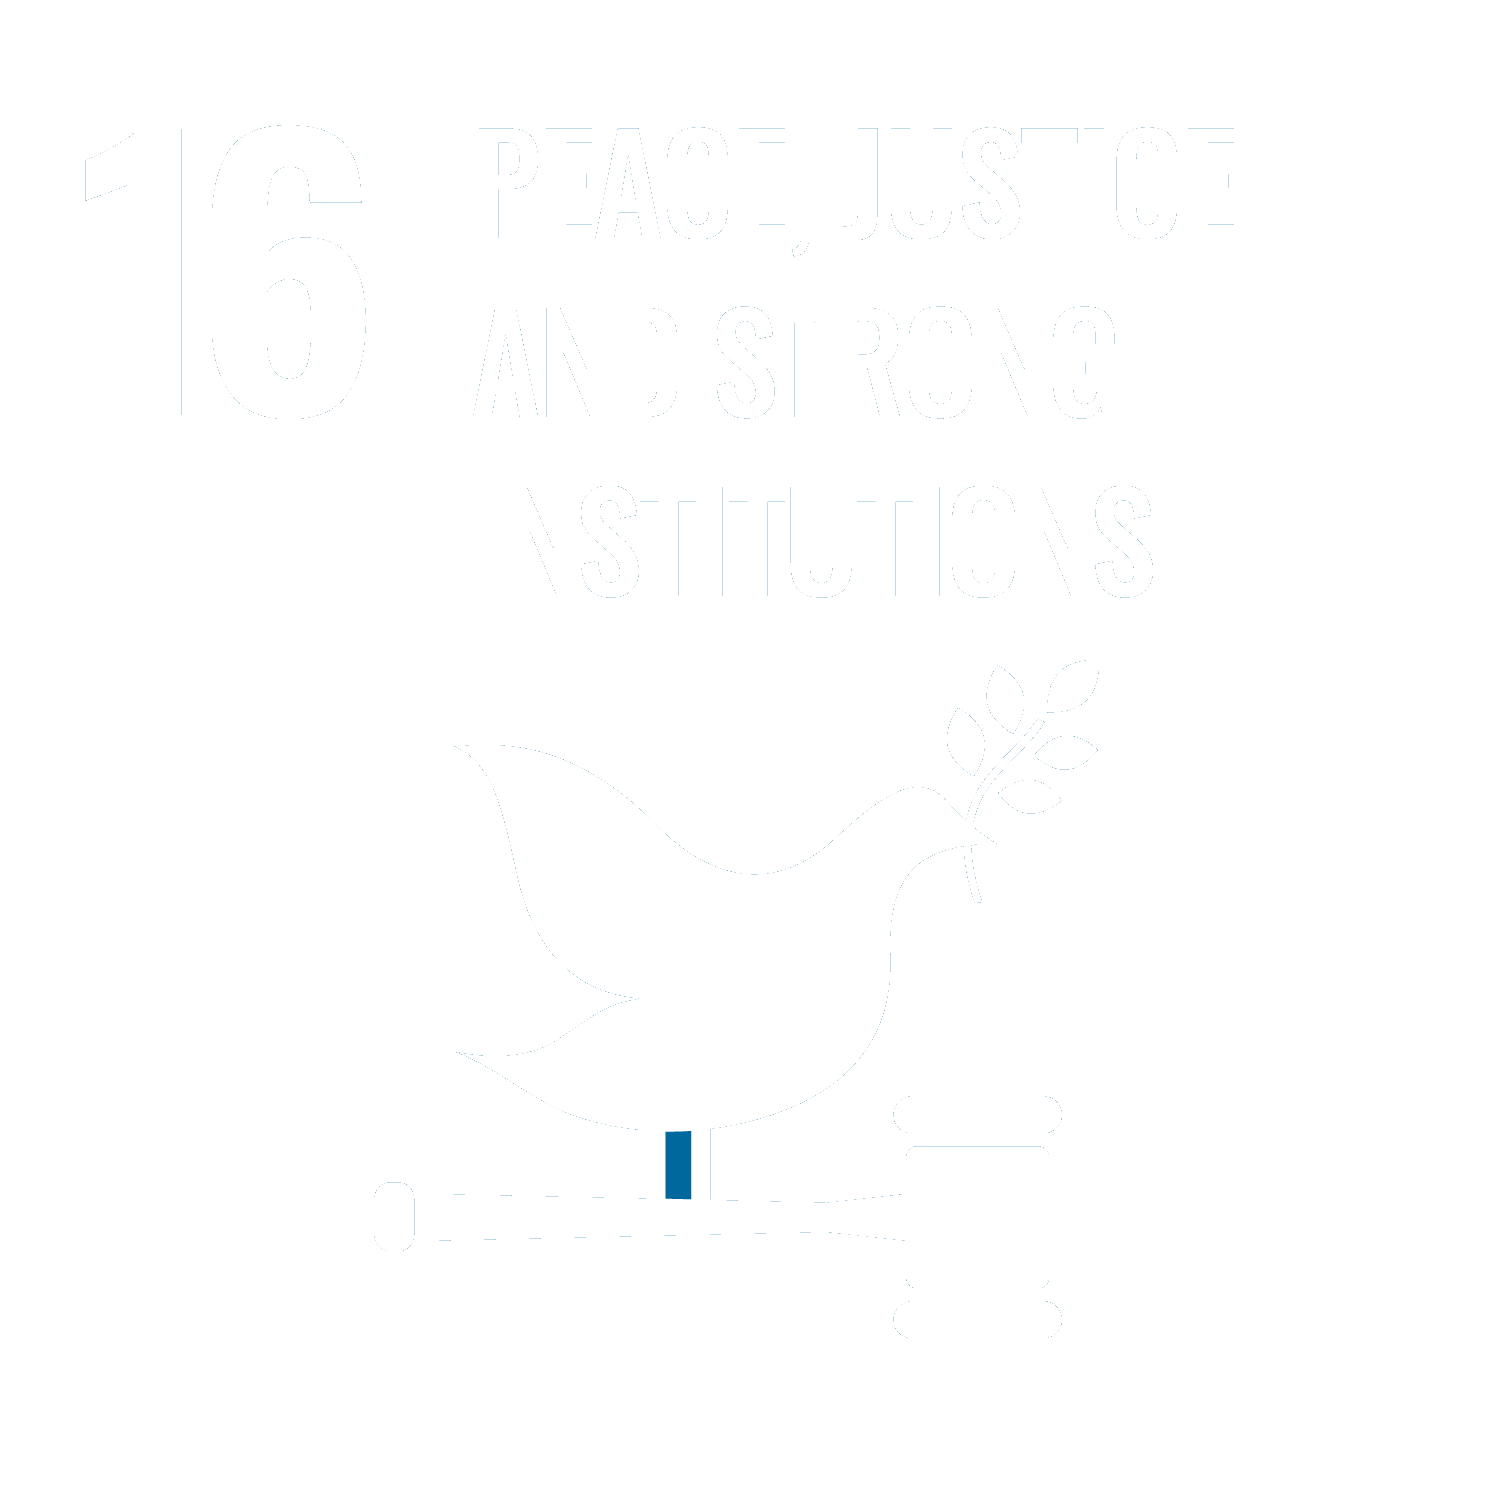 UN Sustainable Development Goals Peace Justice Strong Institutions